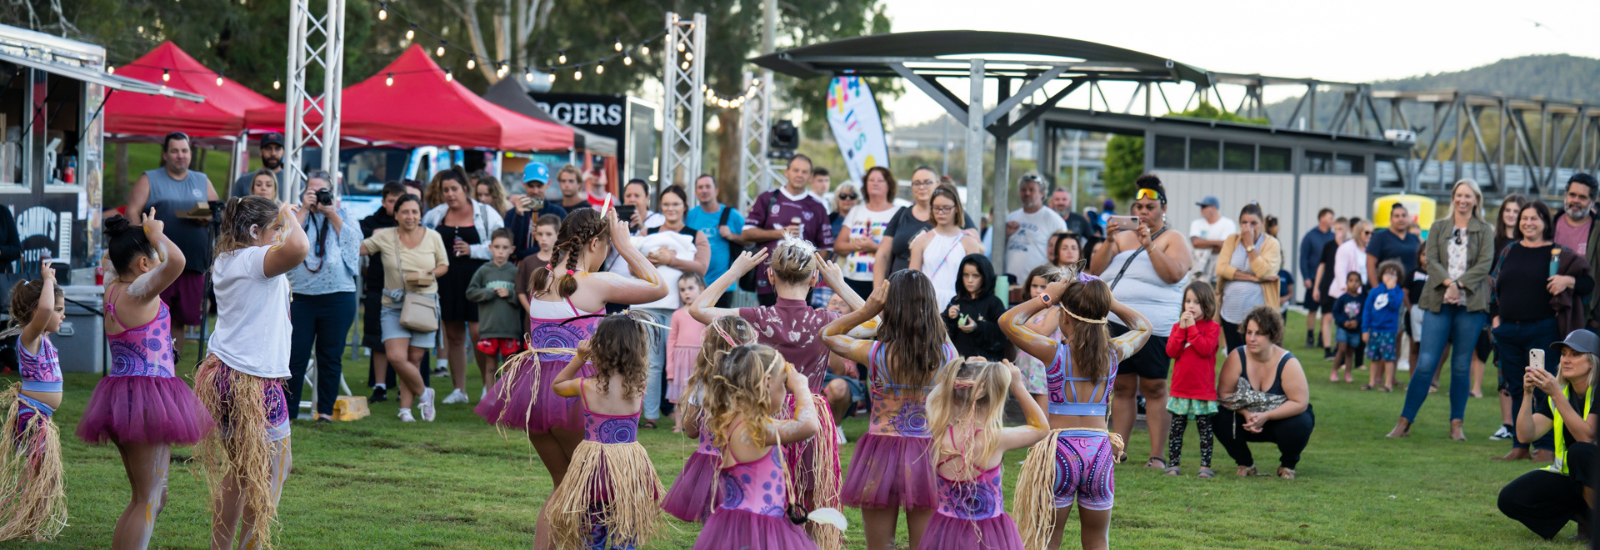 Kids dancing at local community event banner image